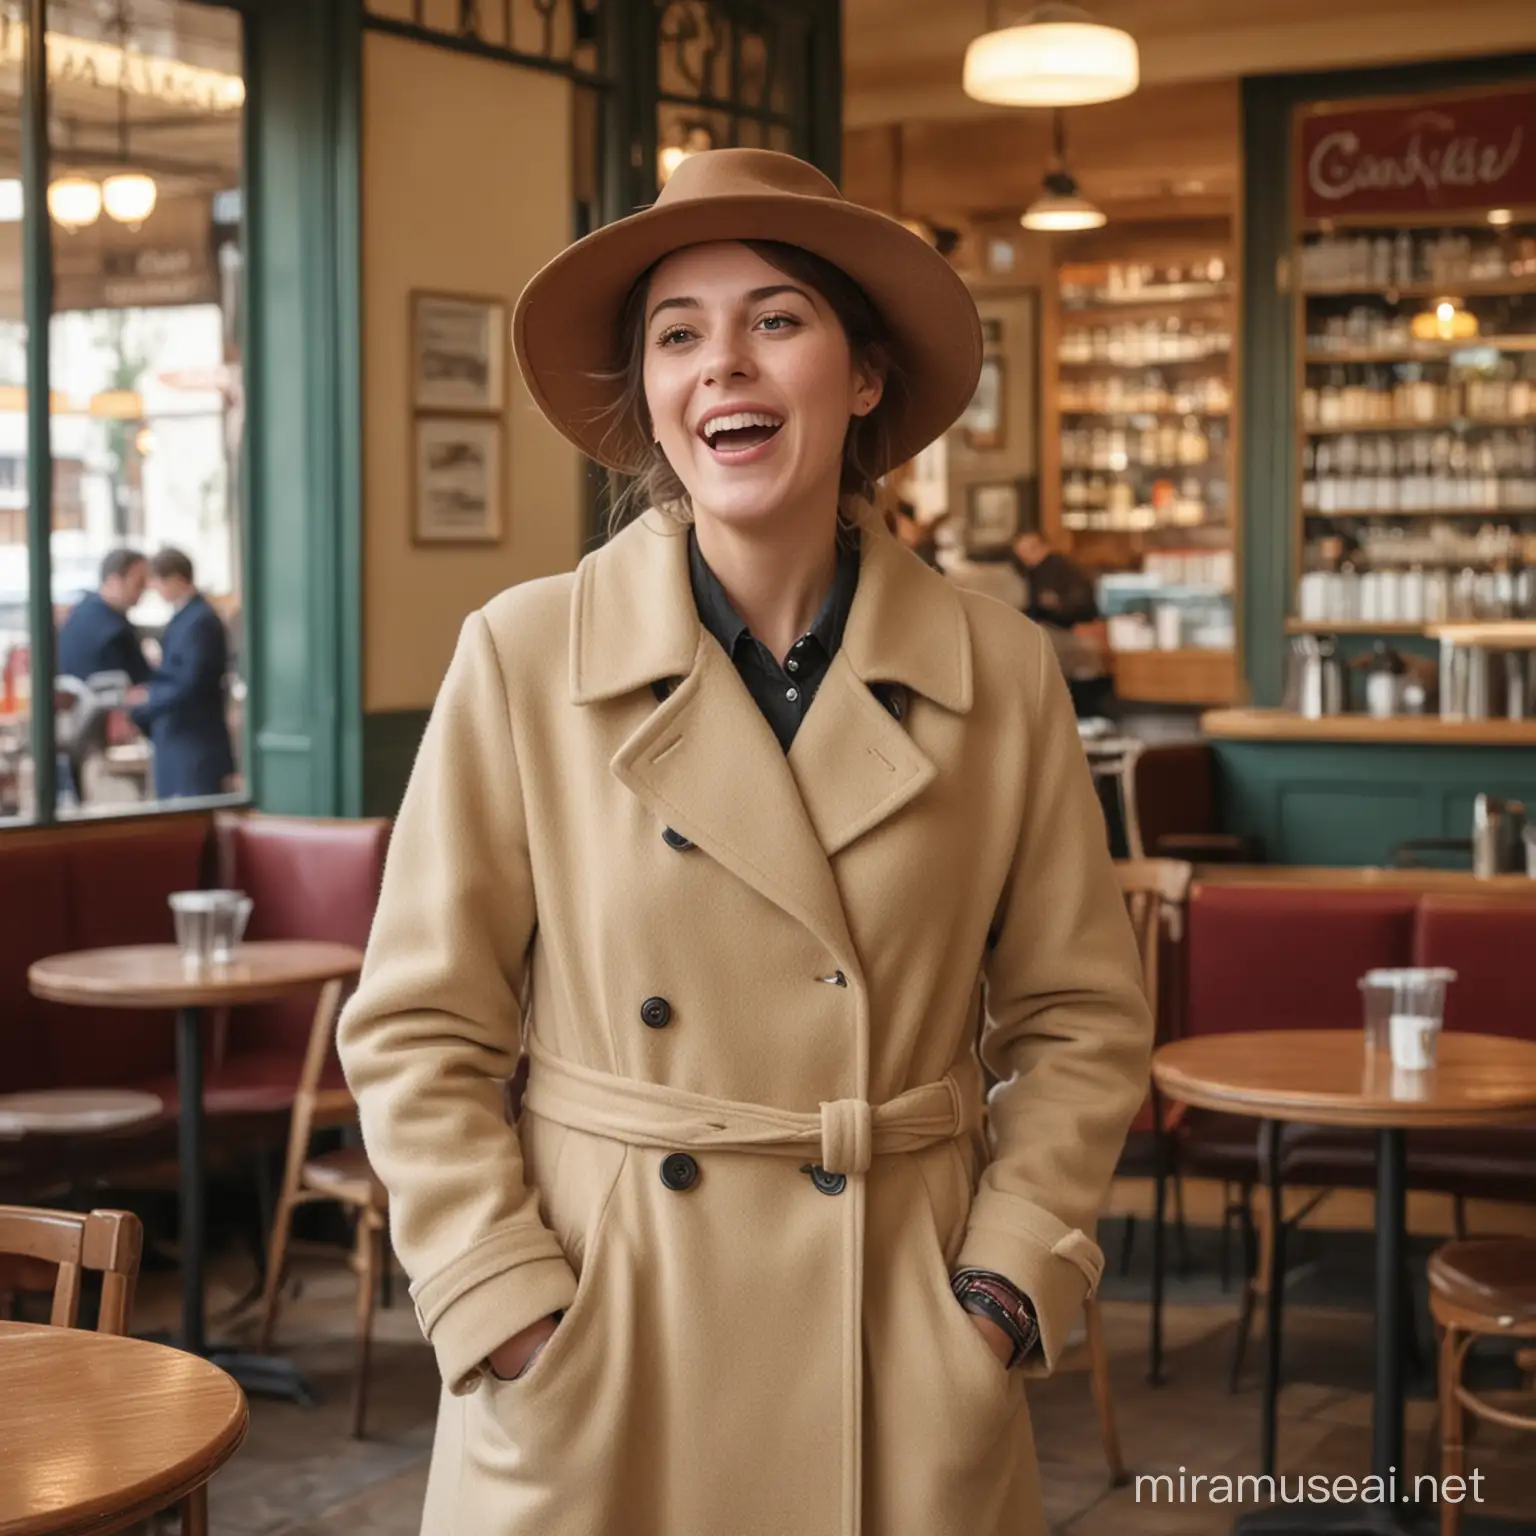 color image of a standing woman wearing a hat and a coat in a large French café. Her hands are in her pockets and she is singing